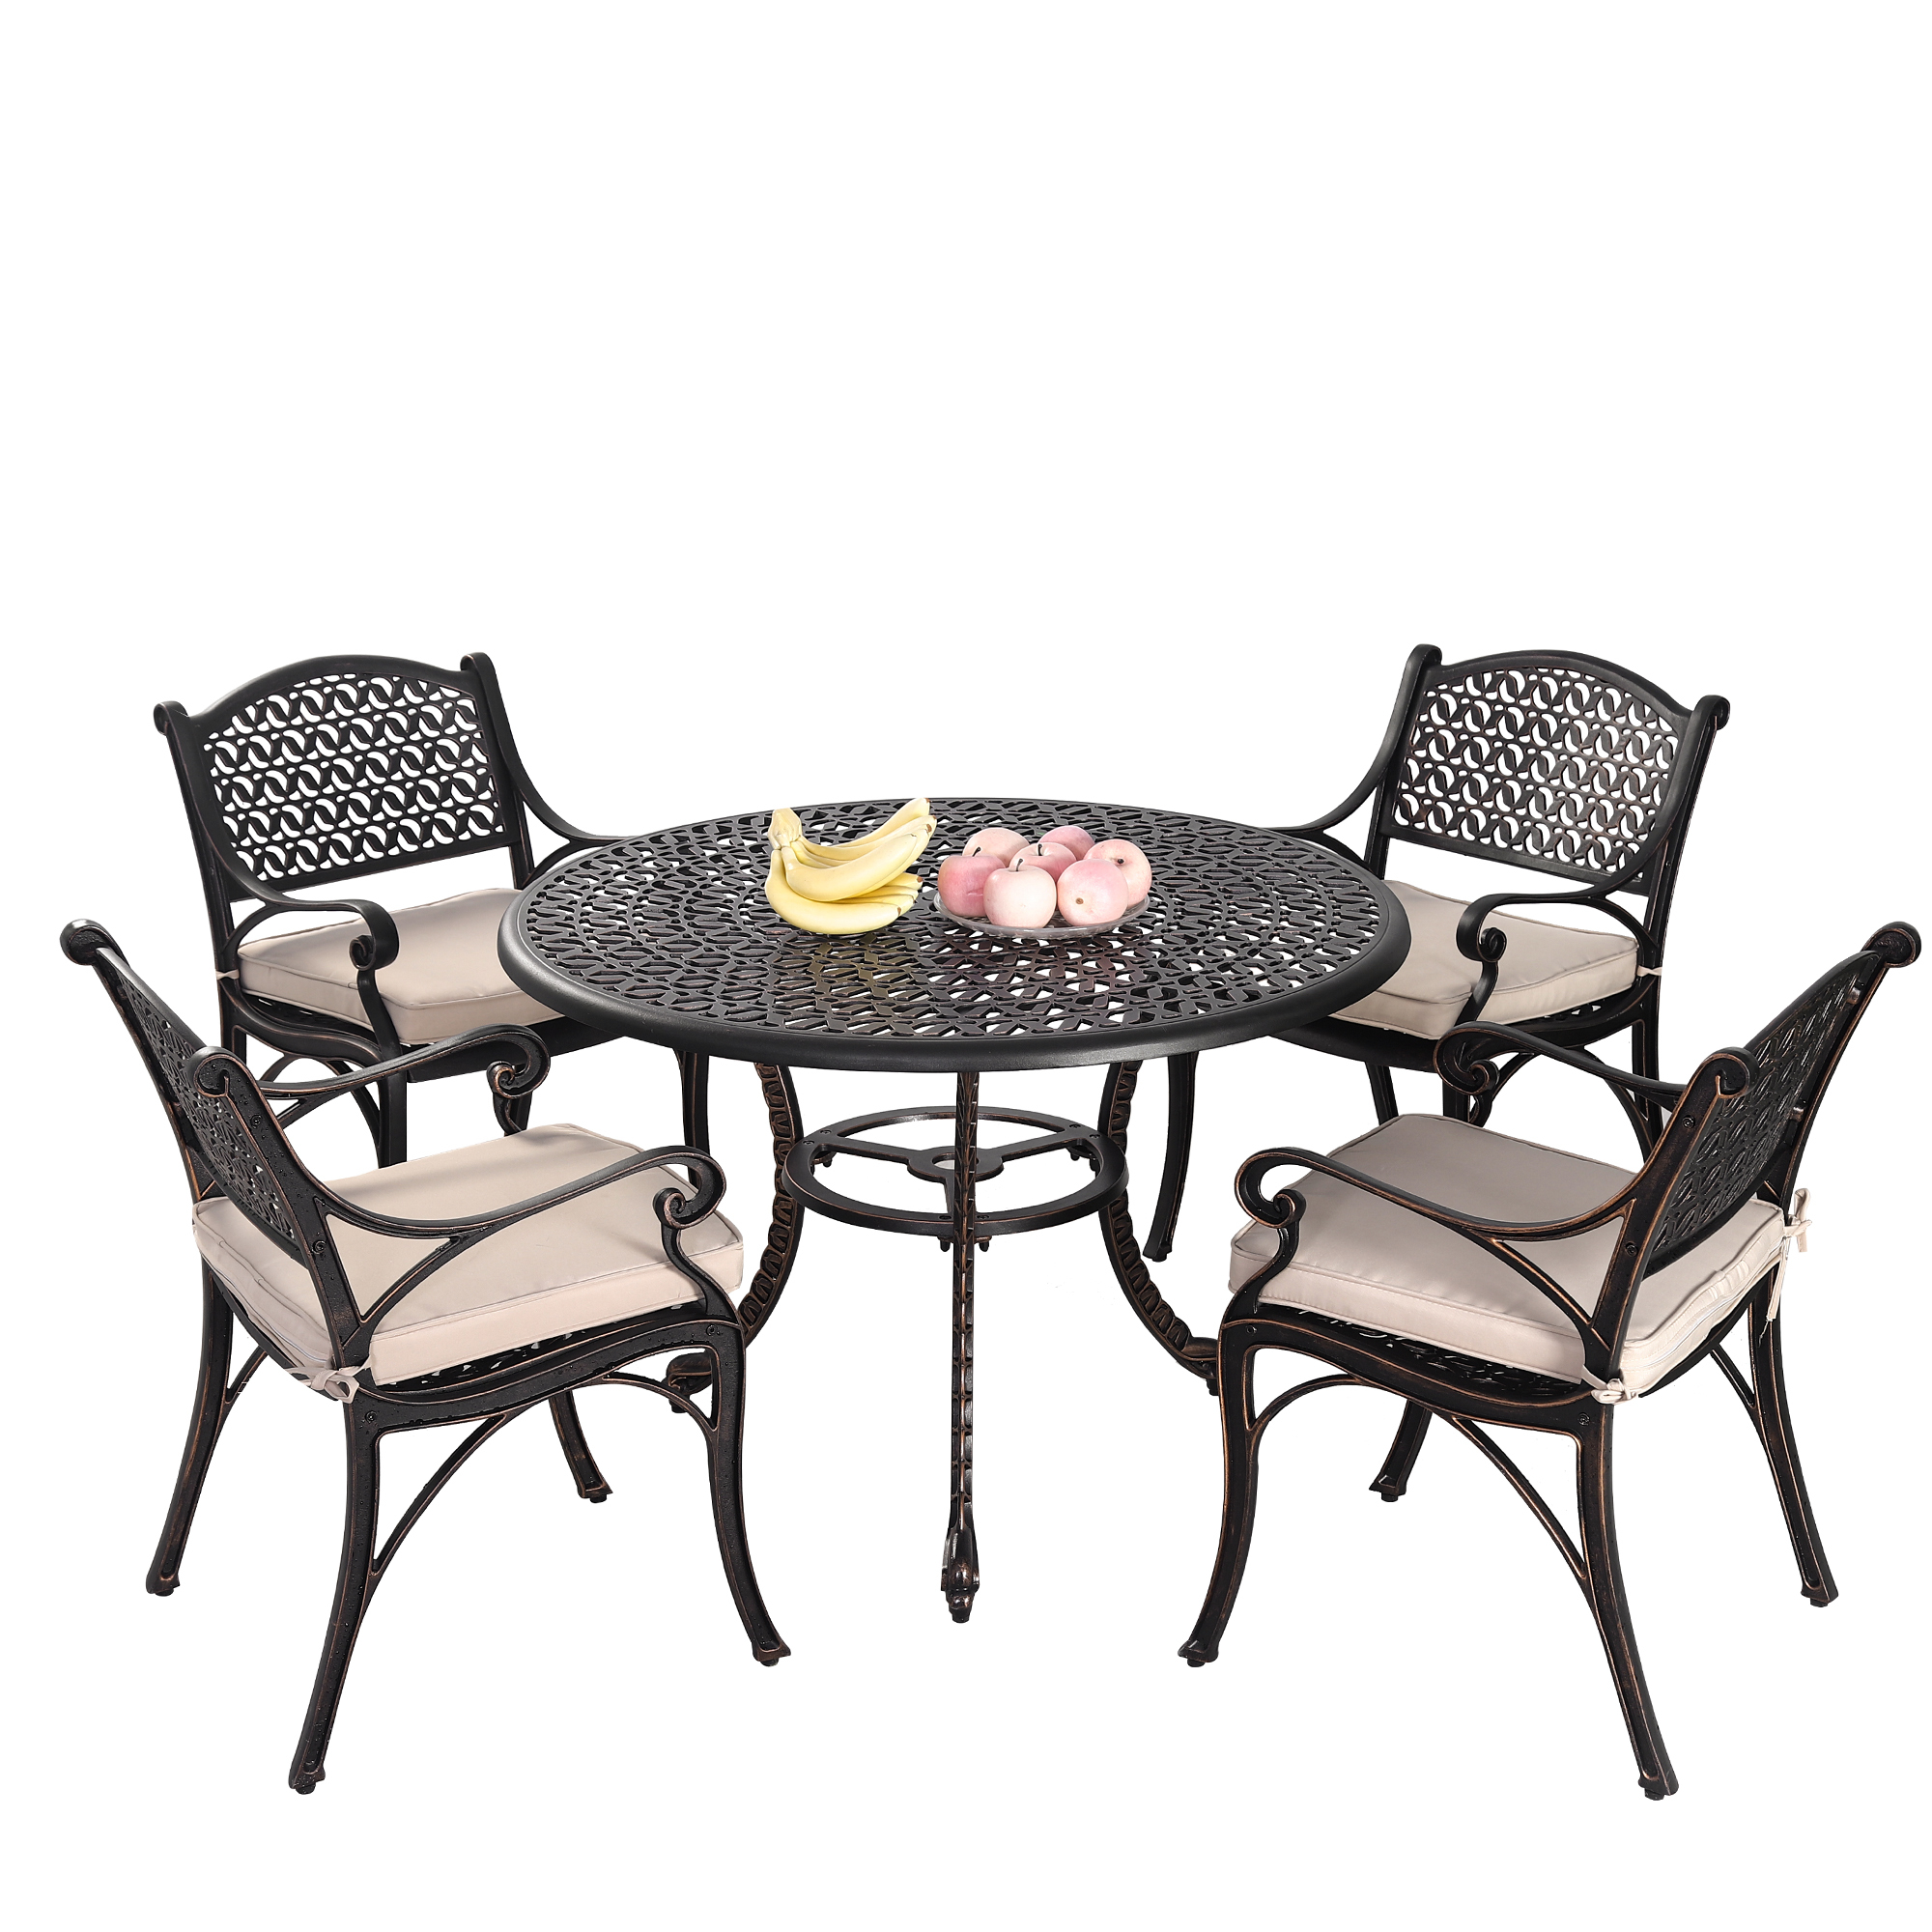 Cast Aluminium Dining Table Chair Set, Metal Outdoor Table And Chairs Australia